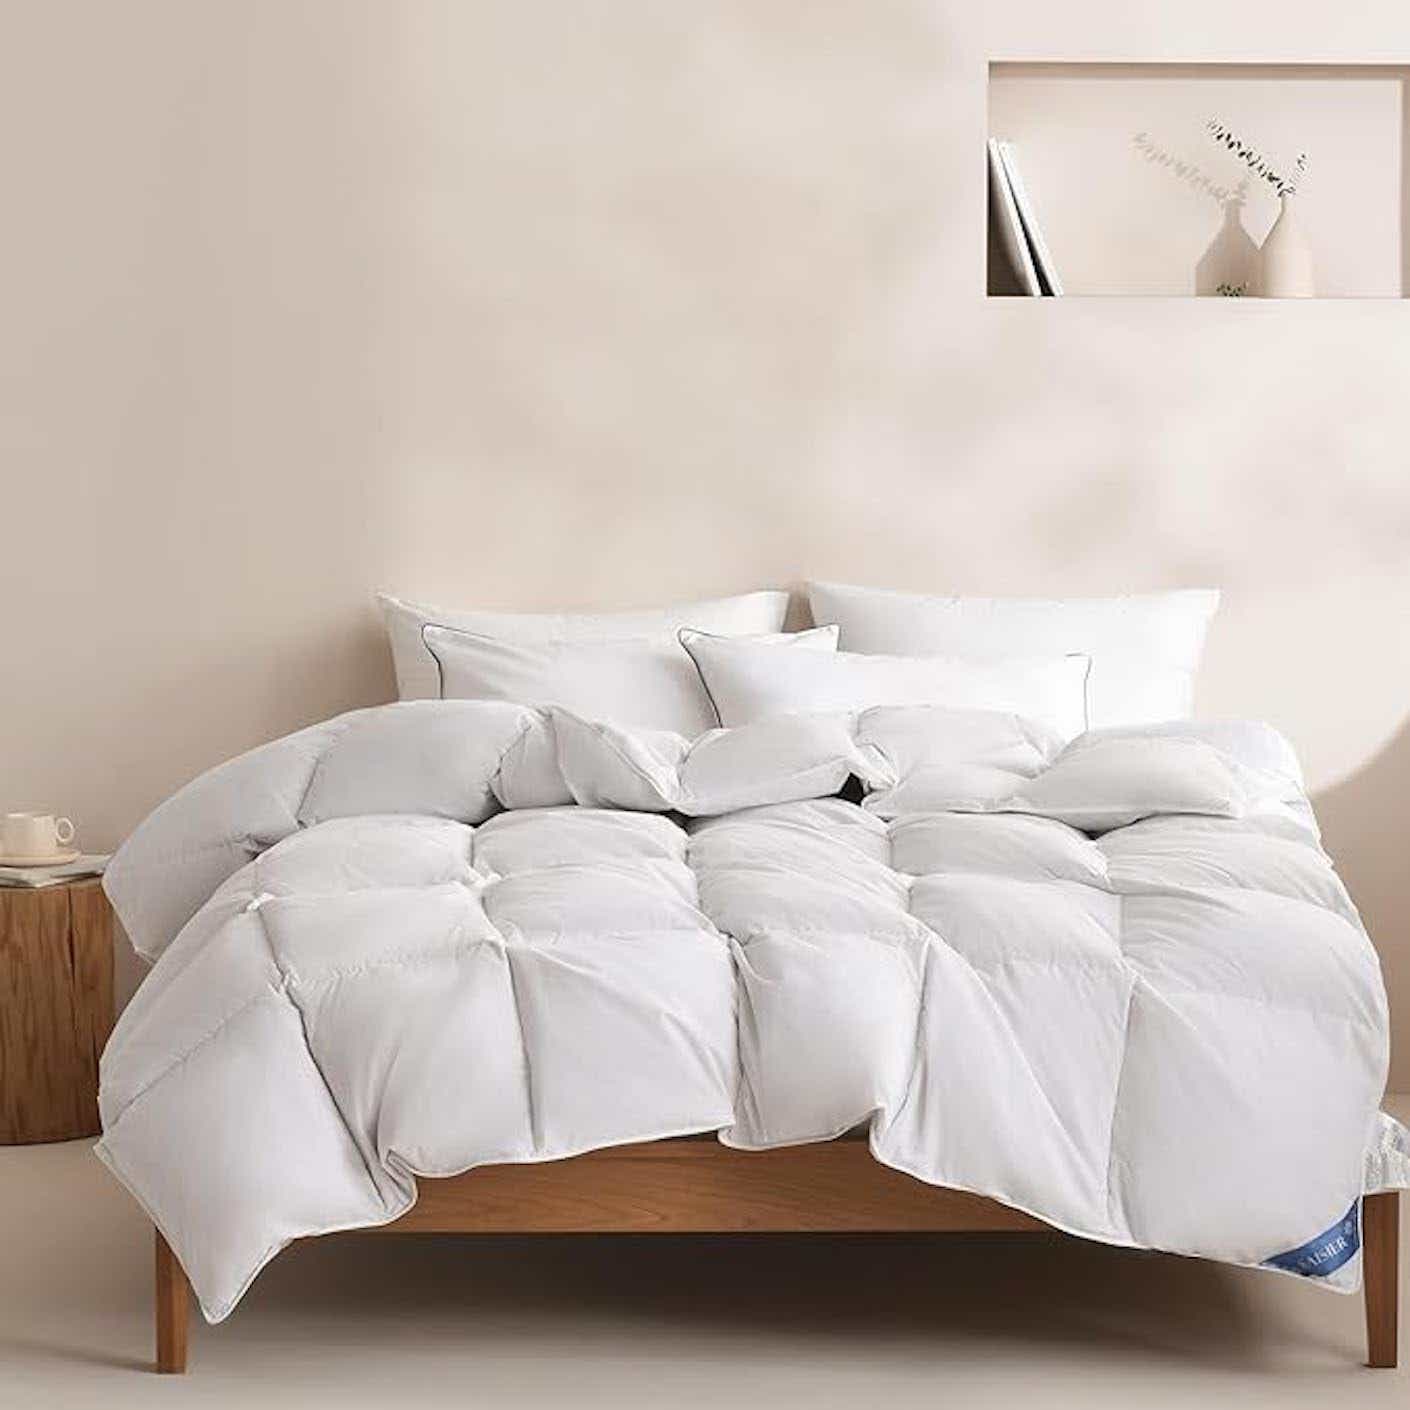 A bed with a duvet cover.